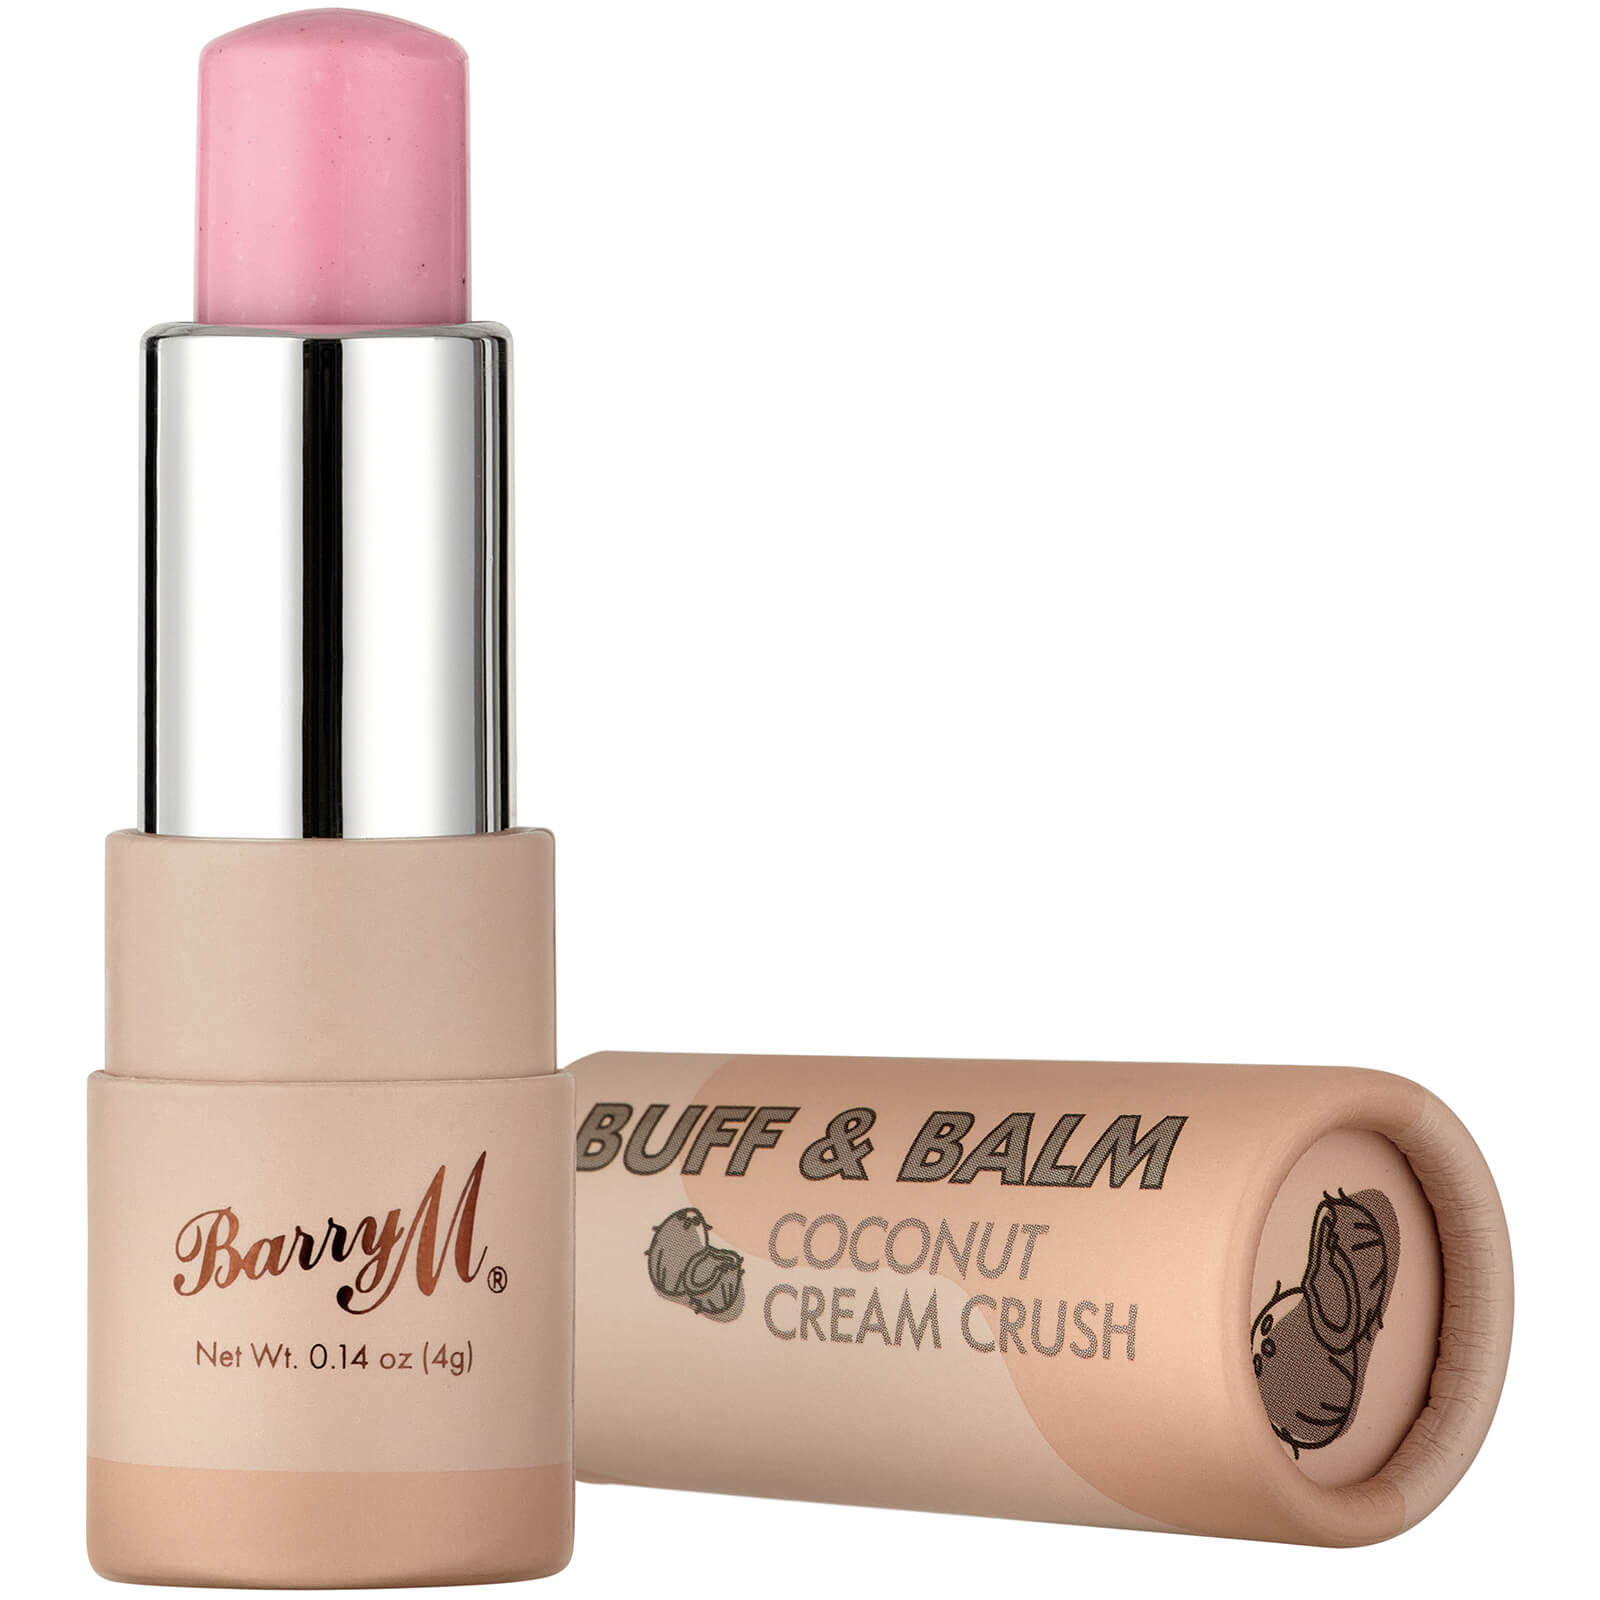 Barry M Cosmetics Buff and Balm 4g (Various Shades) - Coconut Cream Crush